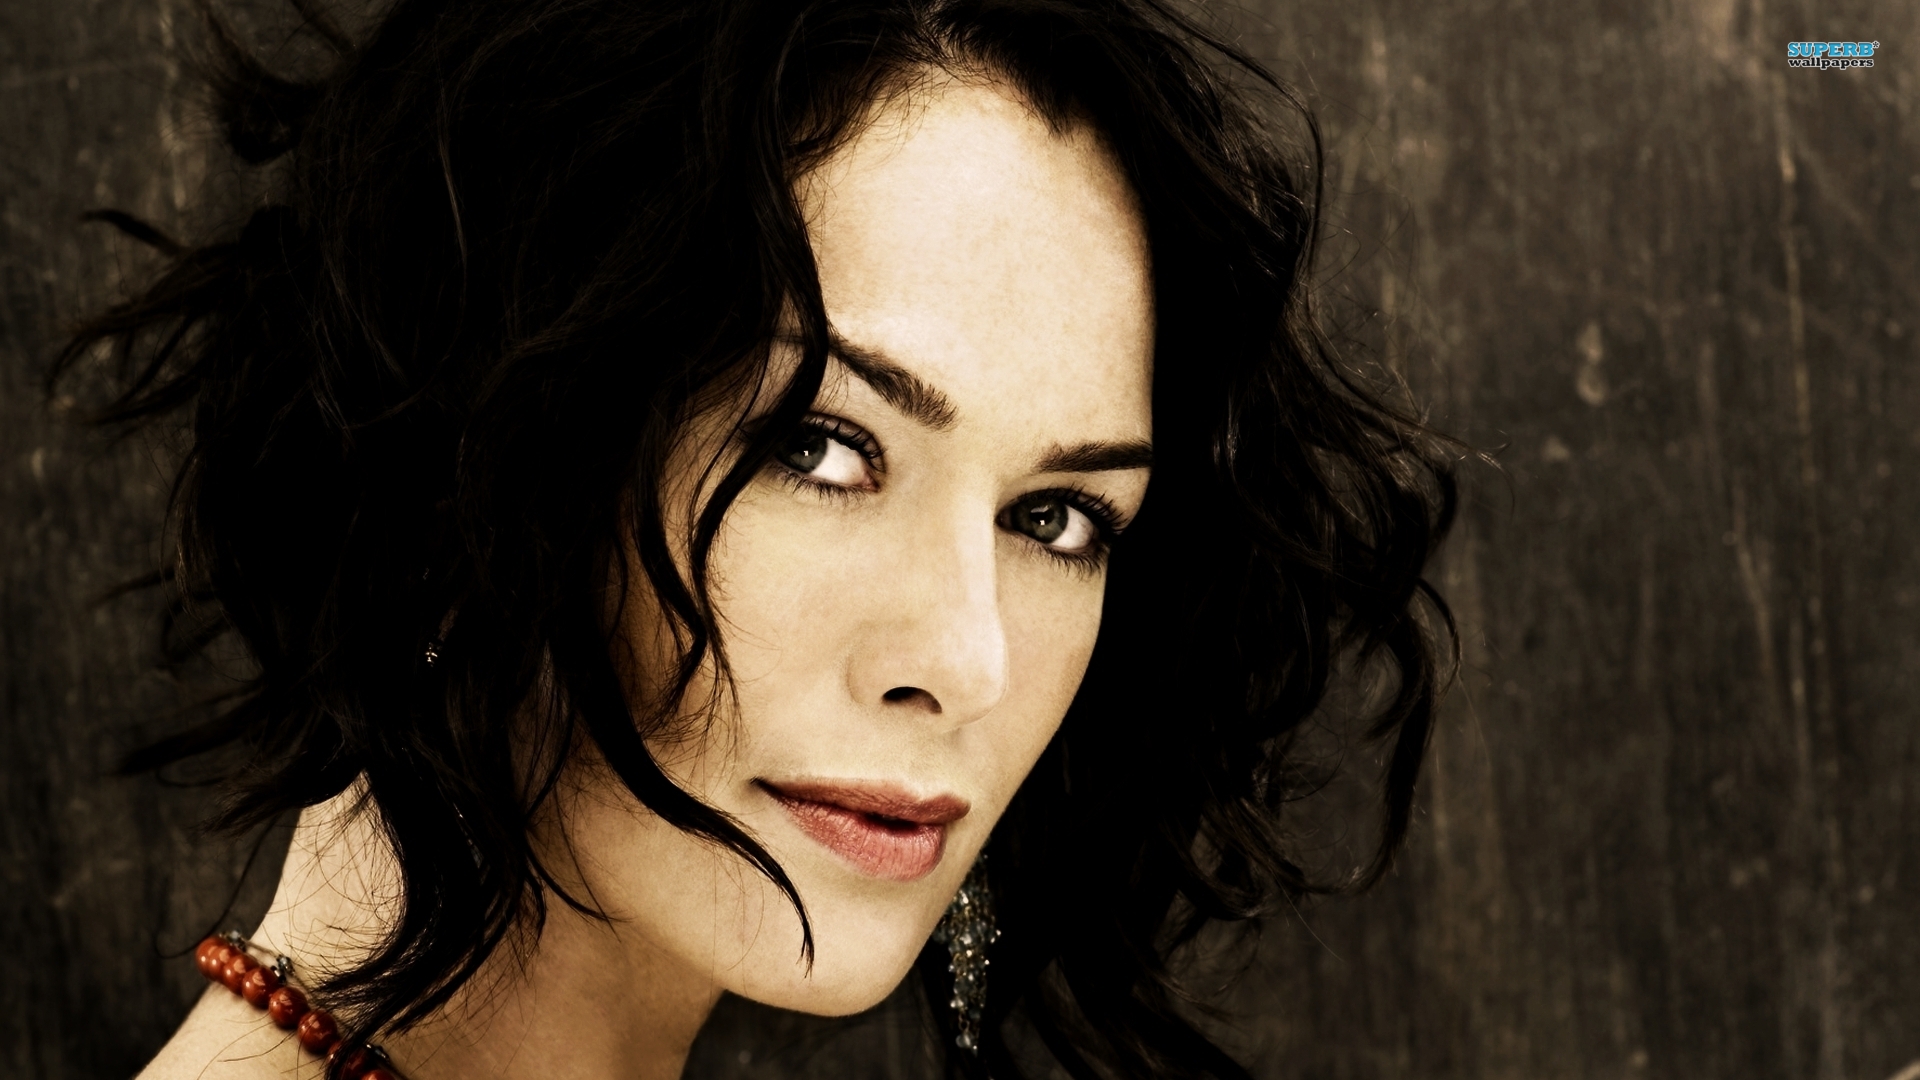 Lena Headey HD Wallpapers Are High Definition And Available In Wide Range Of Sizes And Resolutions. Download Full HD Wallpapers Absolutely Free For Your Pc, ...